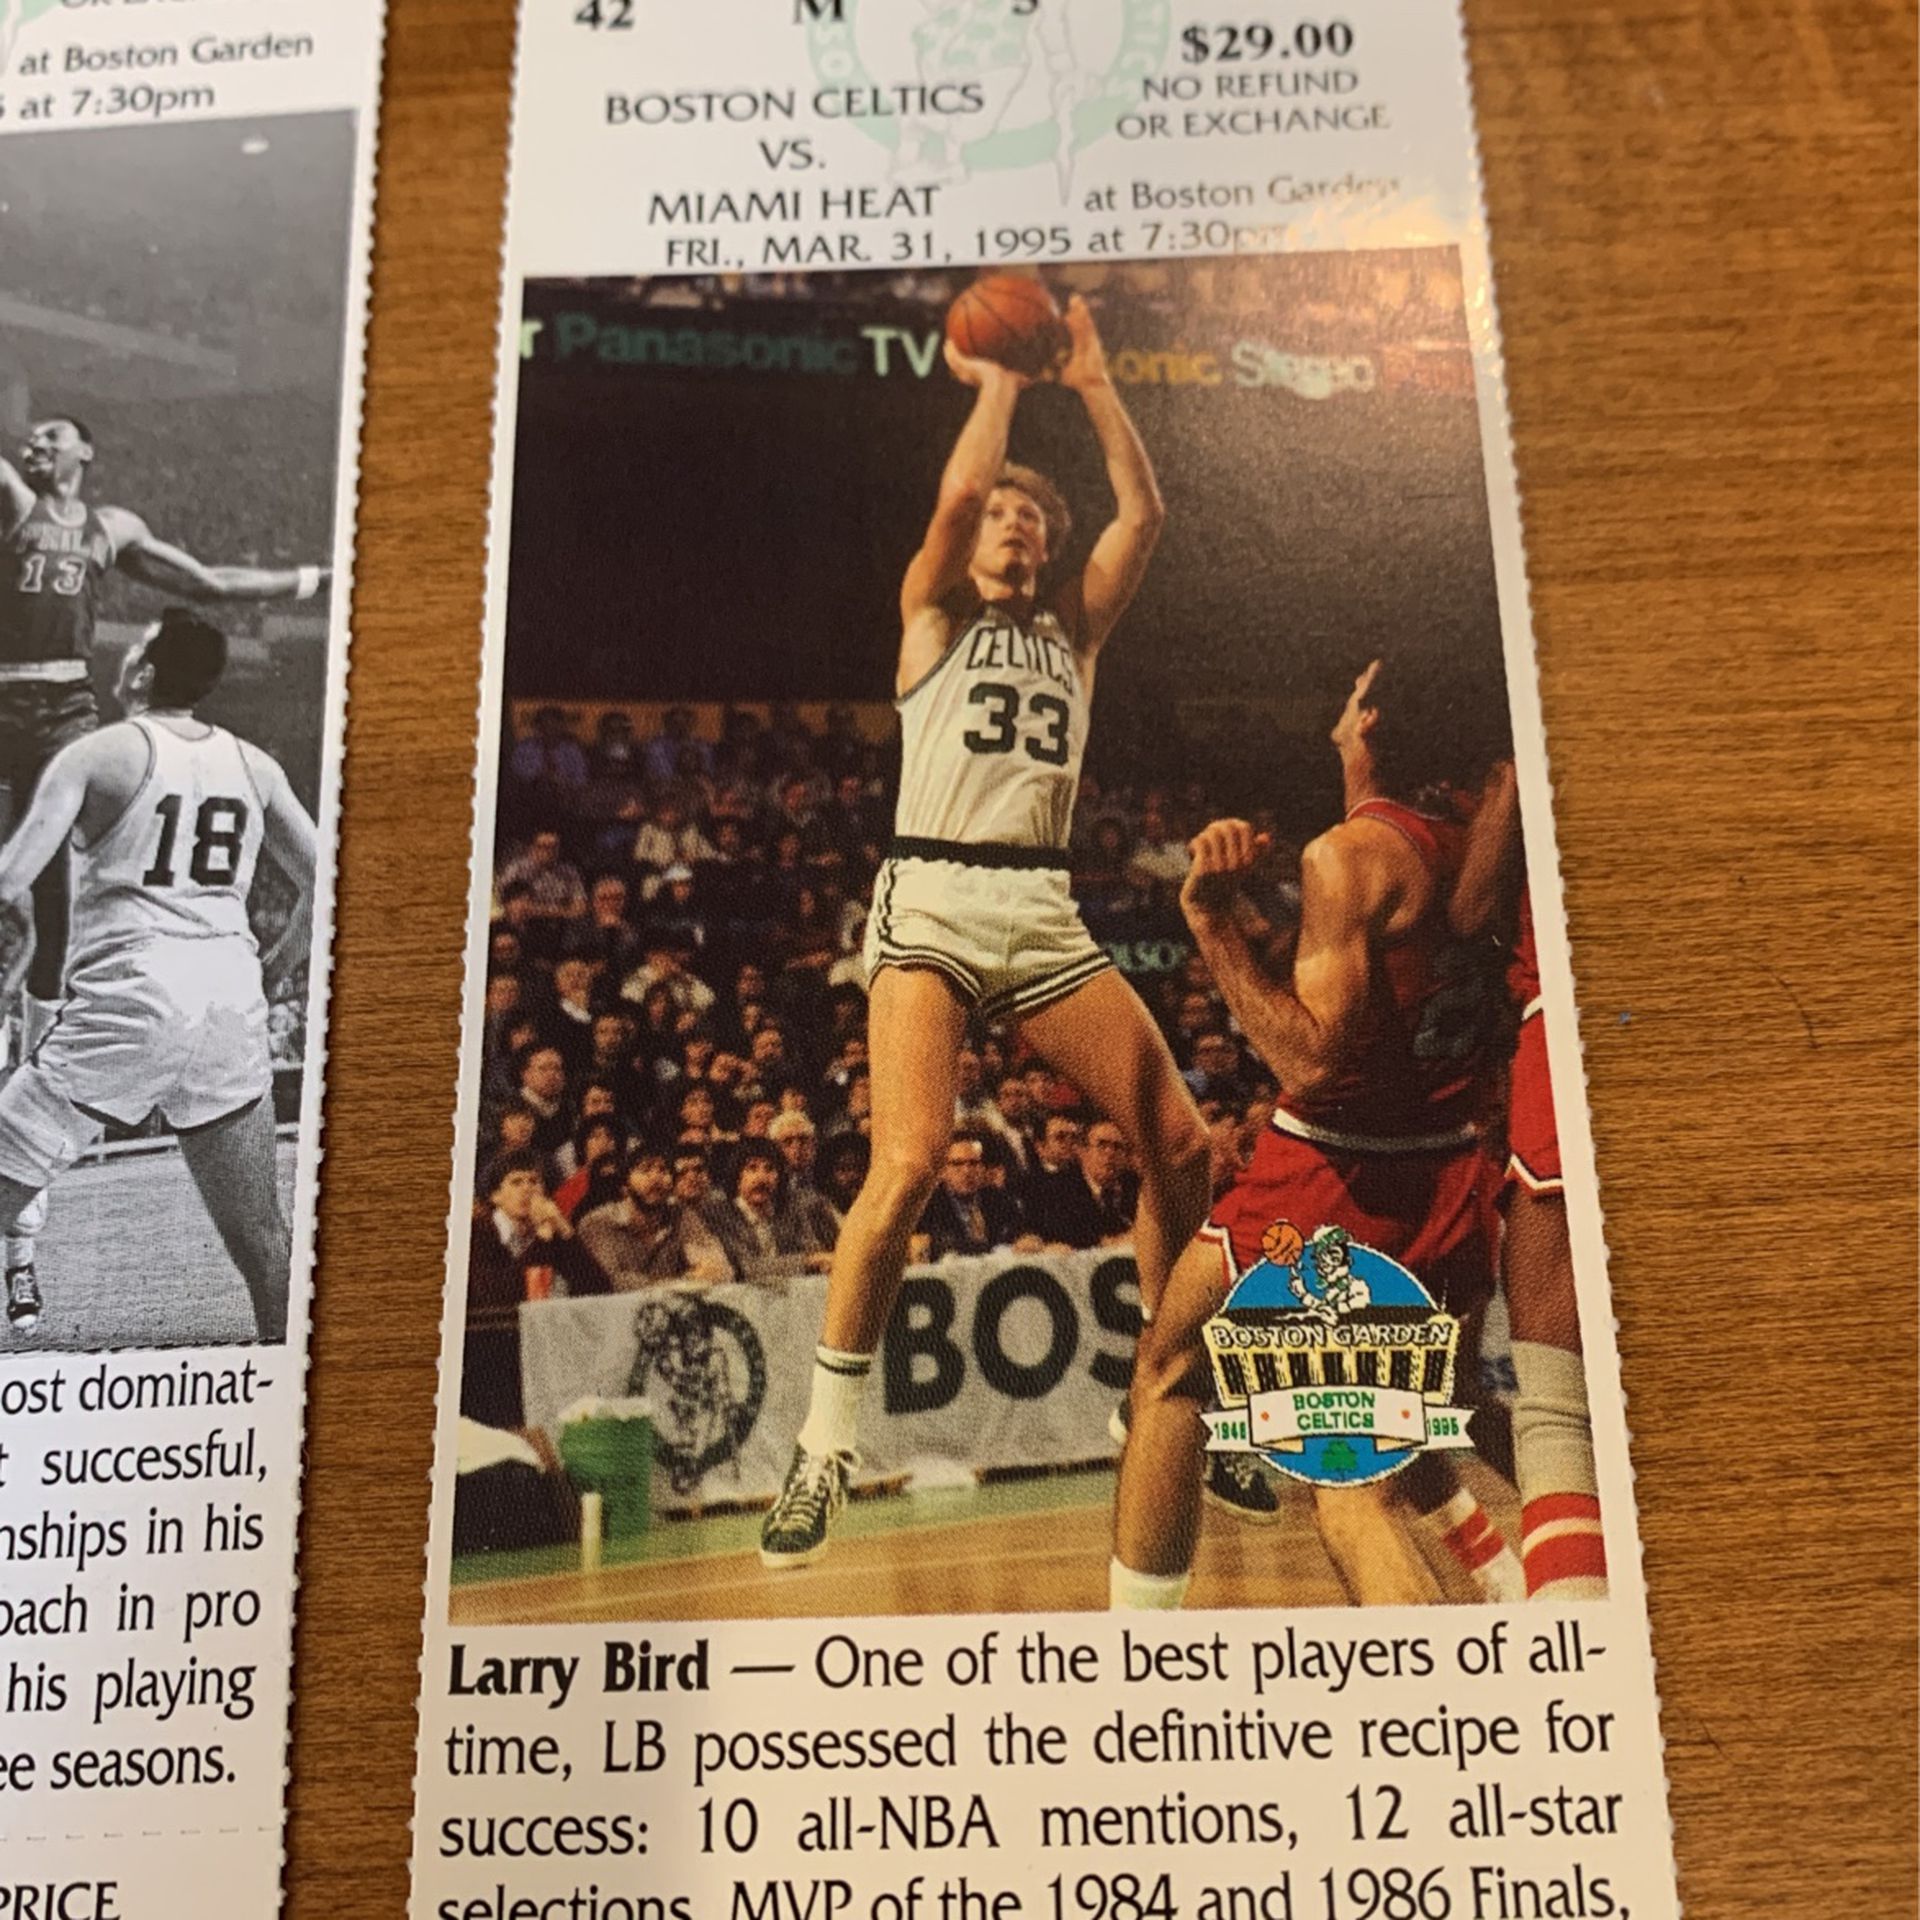 4 Iconic  Celtics Picture Game Tickets From Last Season Of Boston Garden Of: See Description of Tickets Below